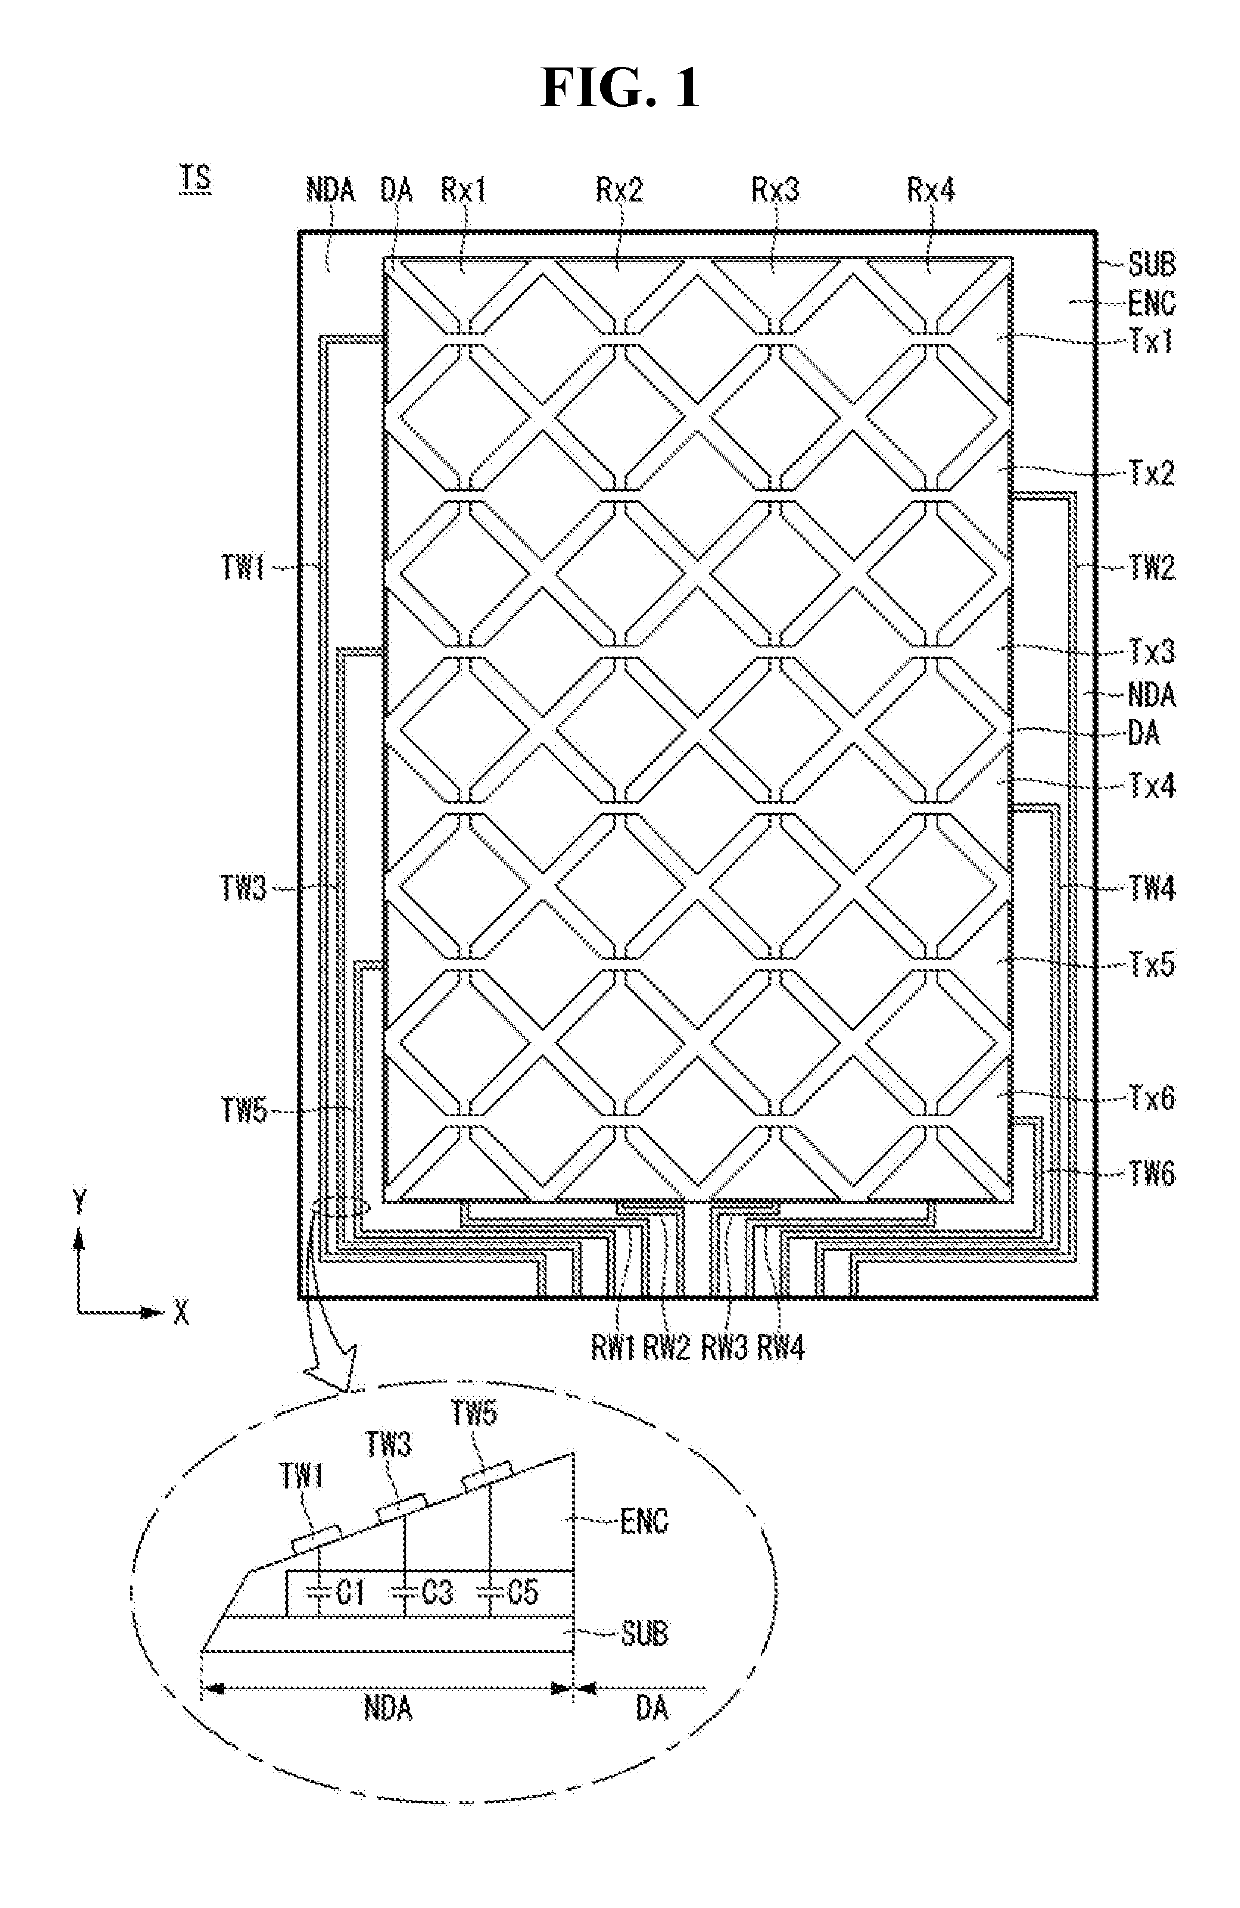 Display apparatus having touch screen